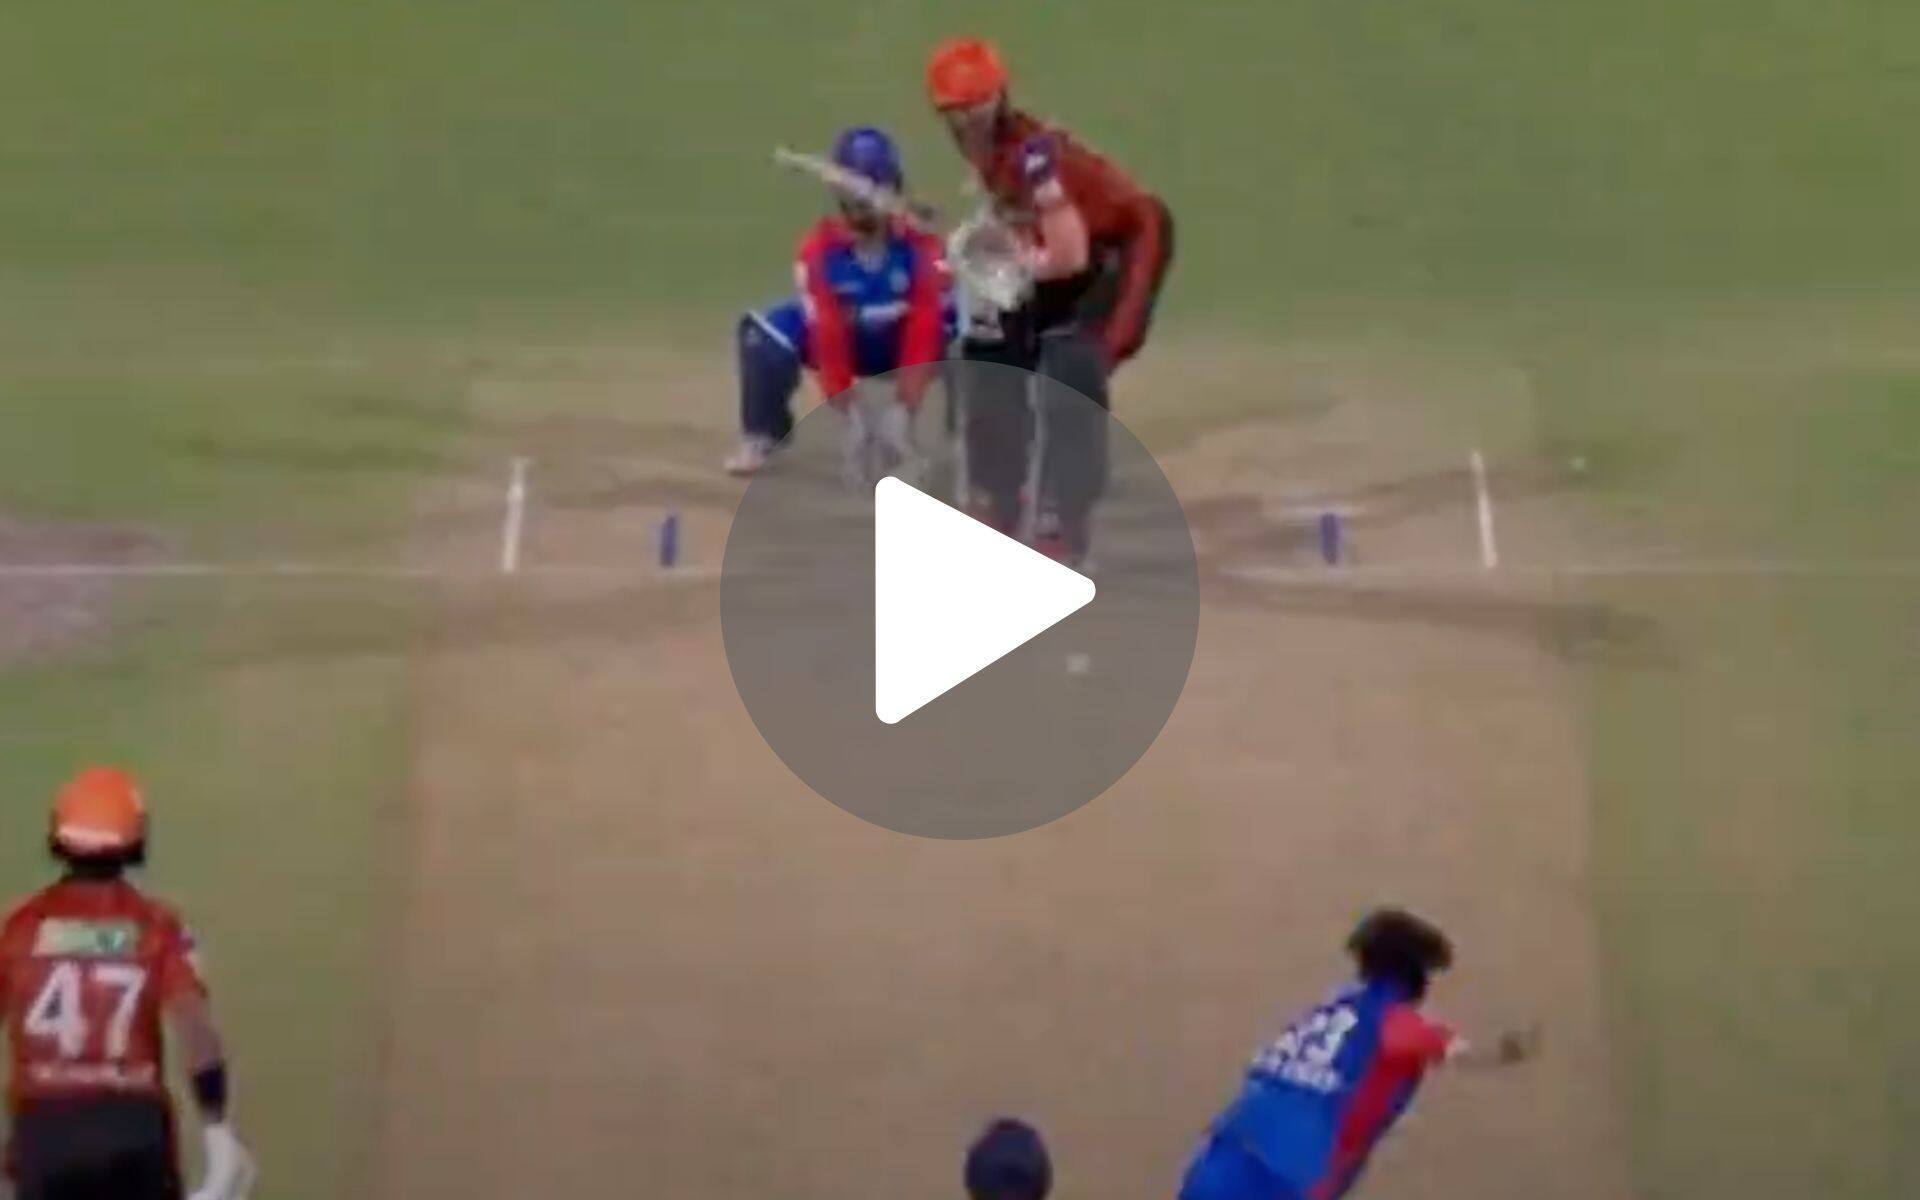 [Watch] Red-Hot Kuldeep Yadav Sizzles In Delhi As He Bags 4th Wicket Amidst SRH Carnage